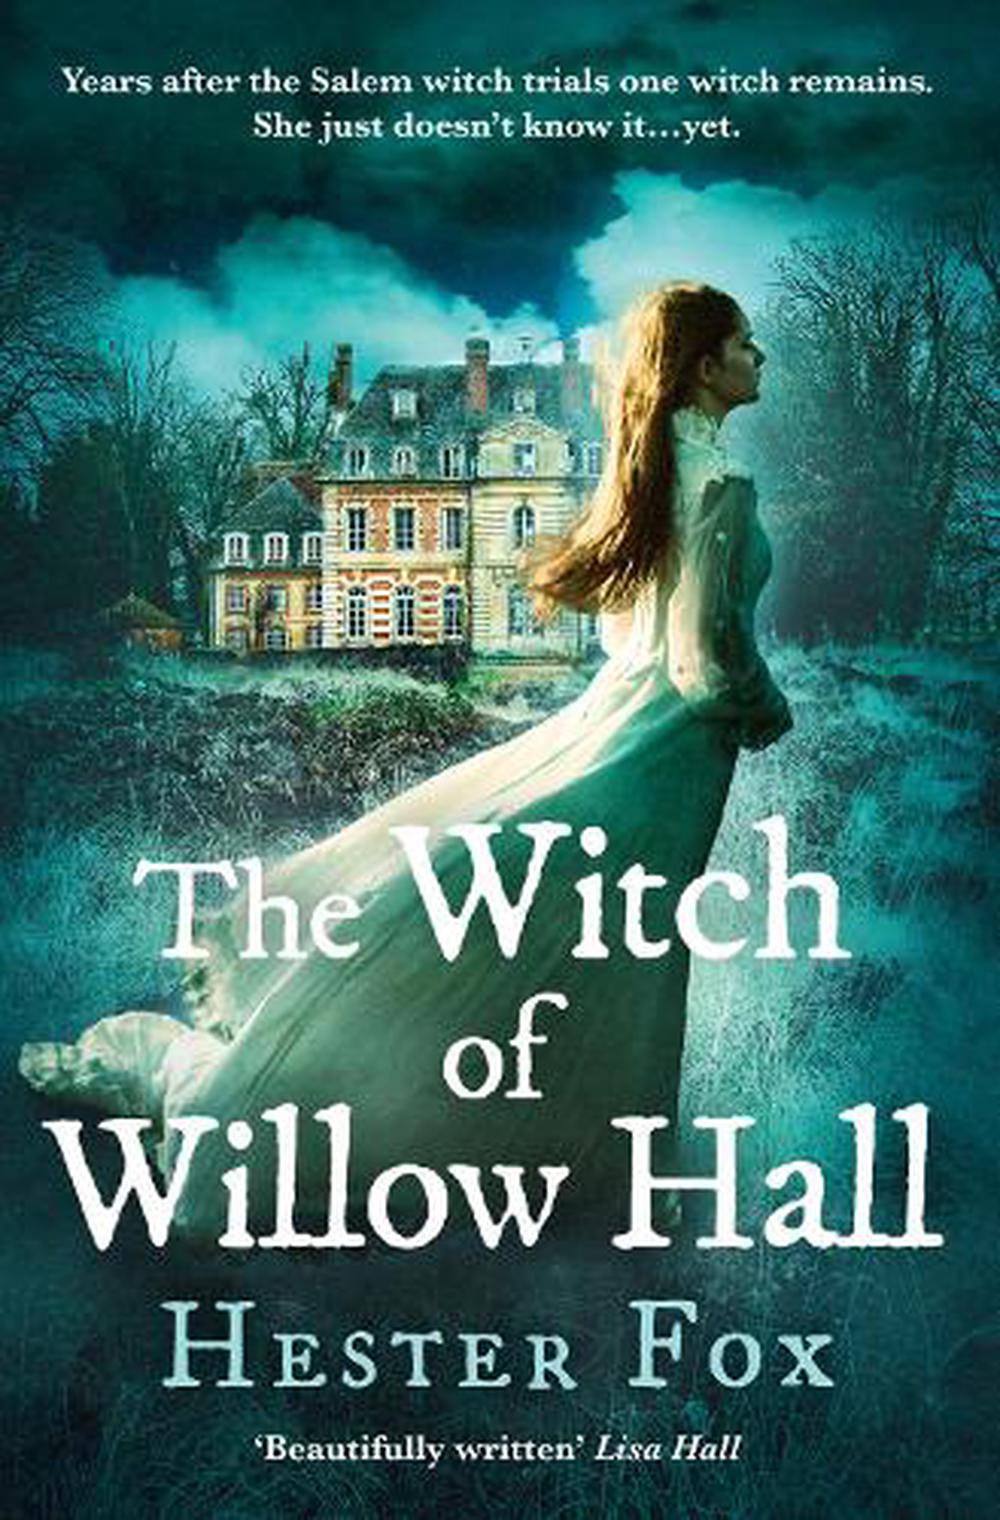 hester fox the witch of willow hall